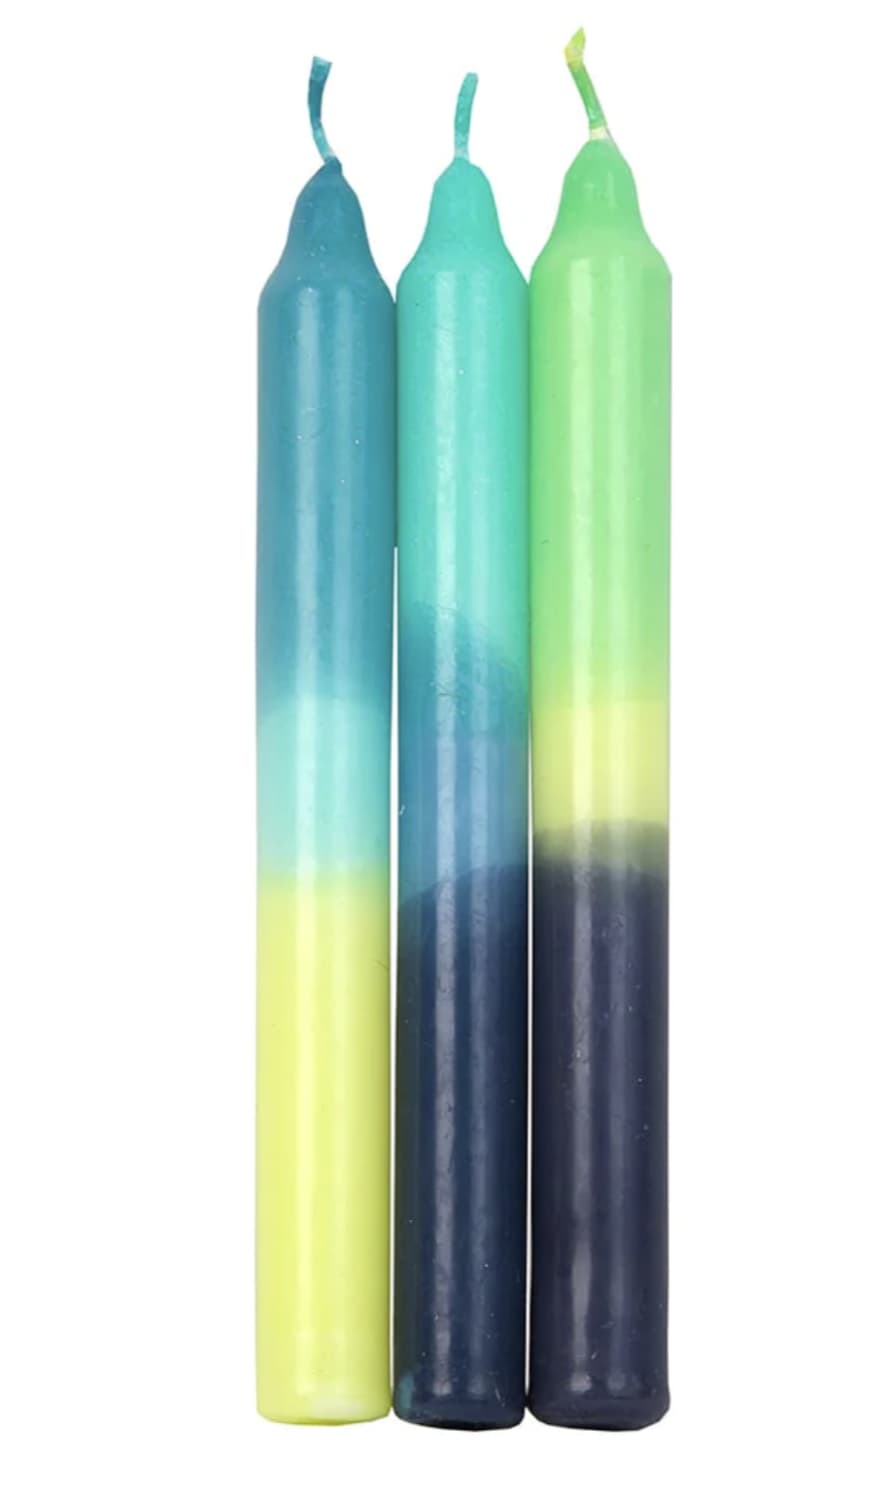 The Letteroom Pack Of Three Ombre Blue And Green Candles